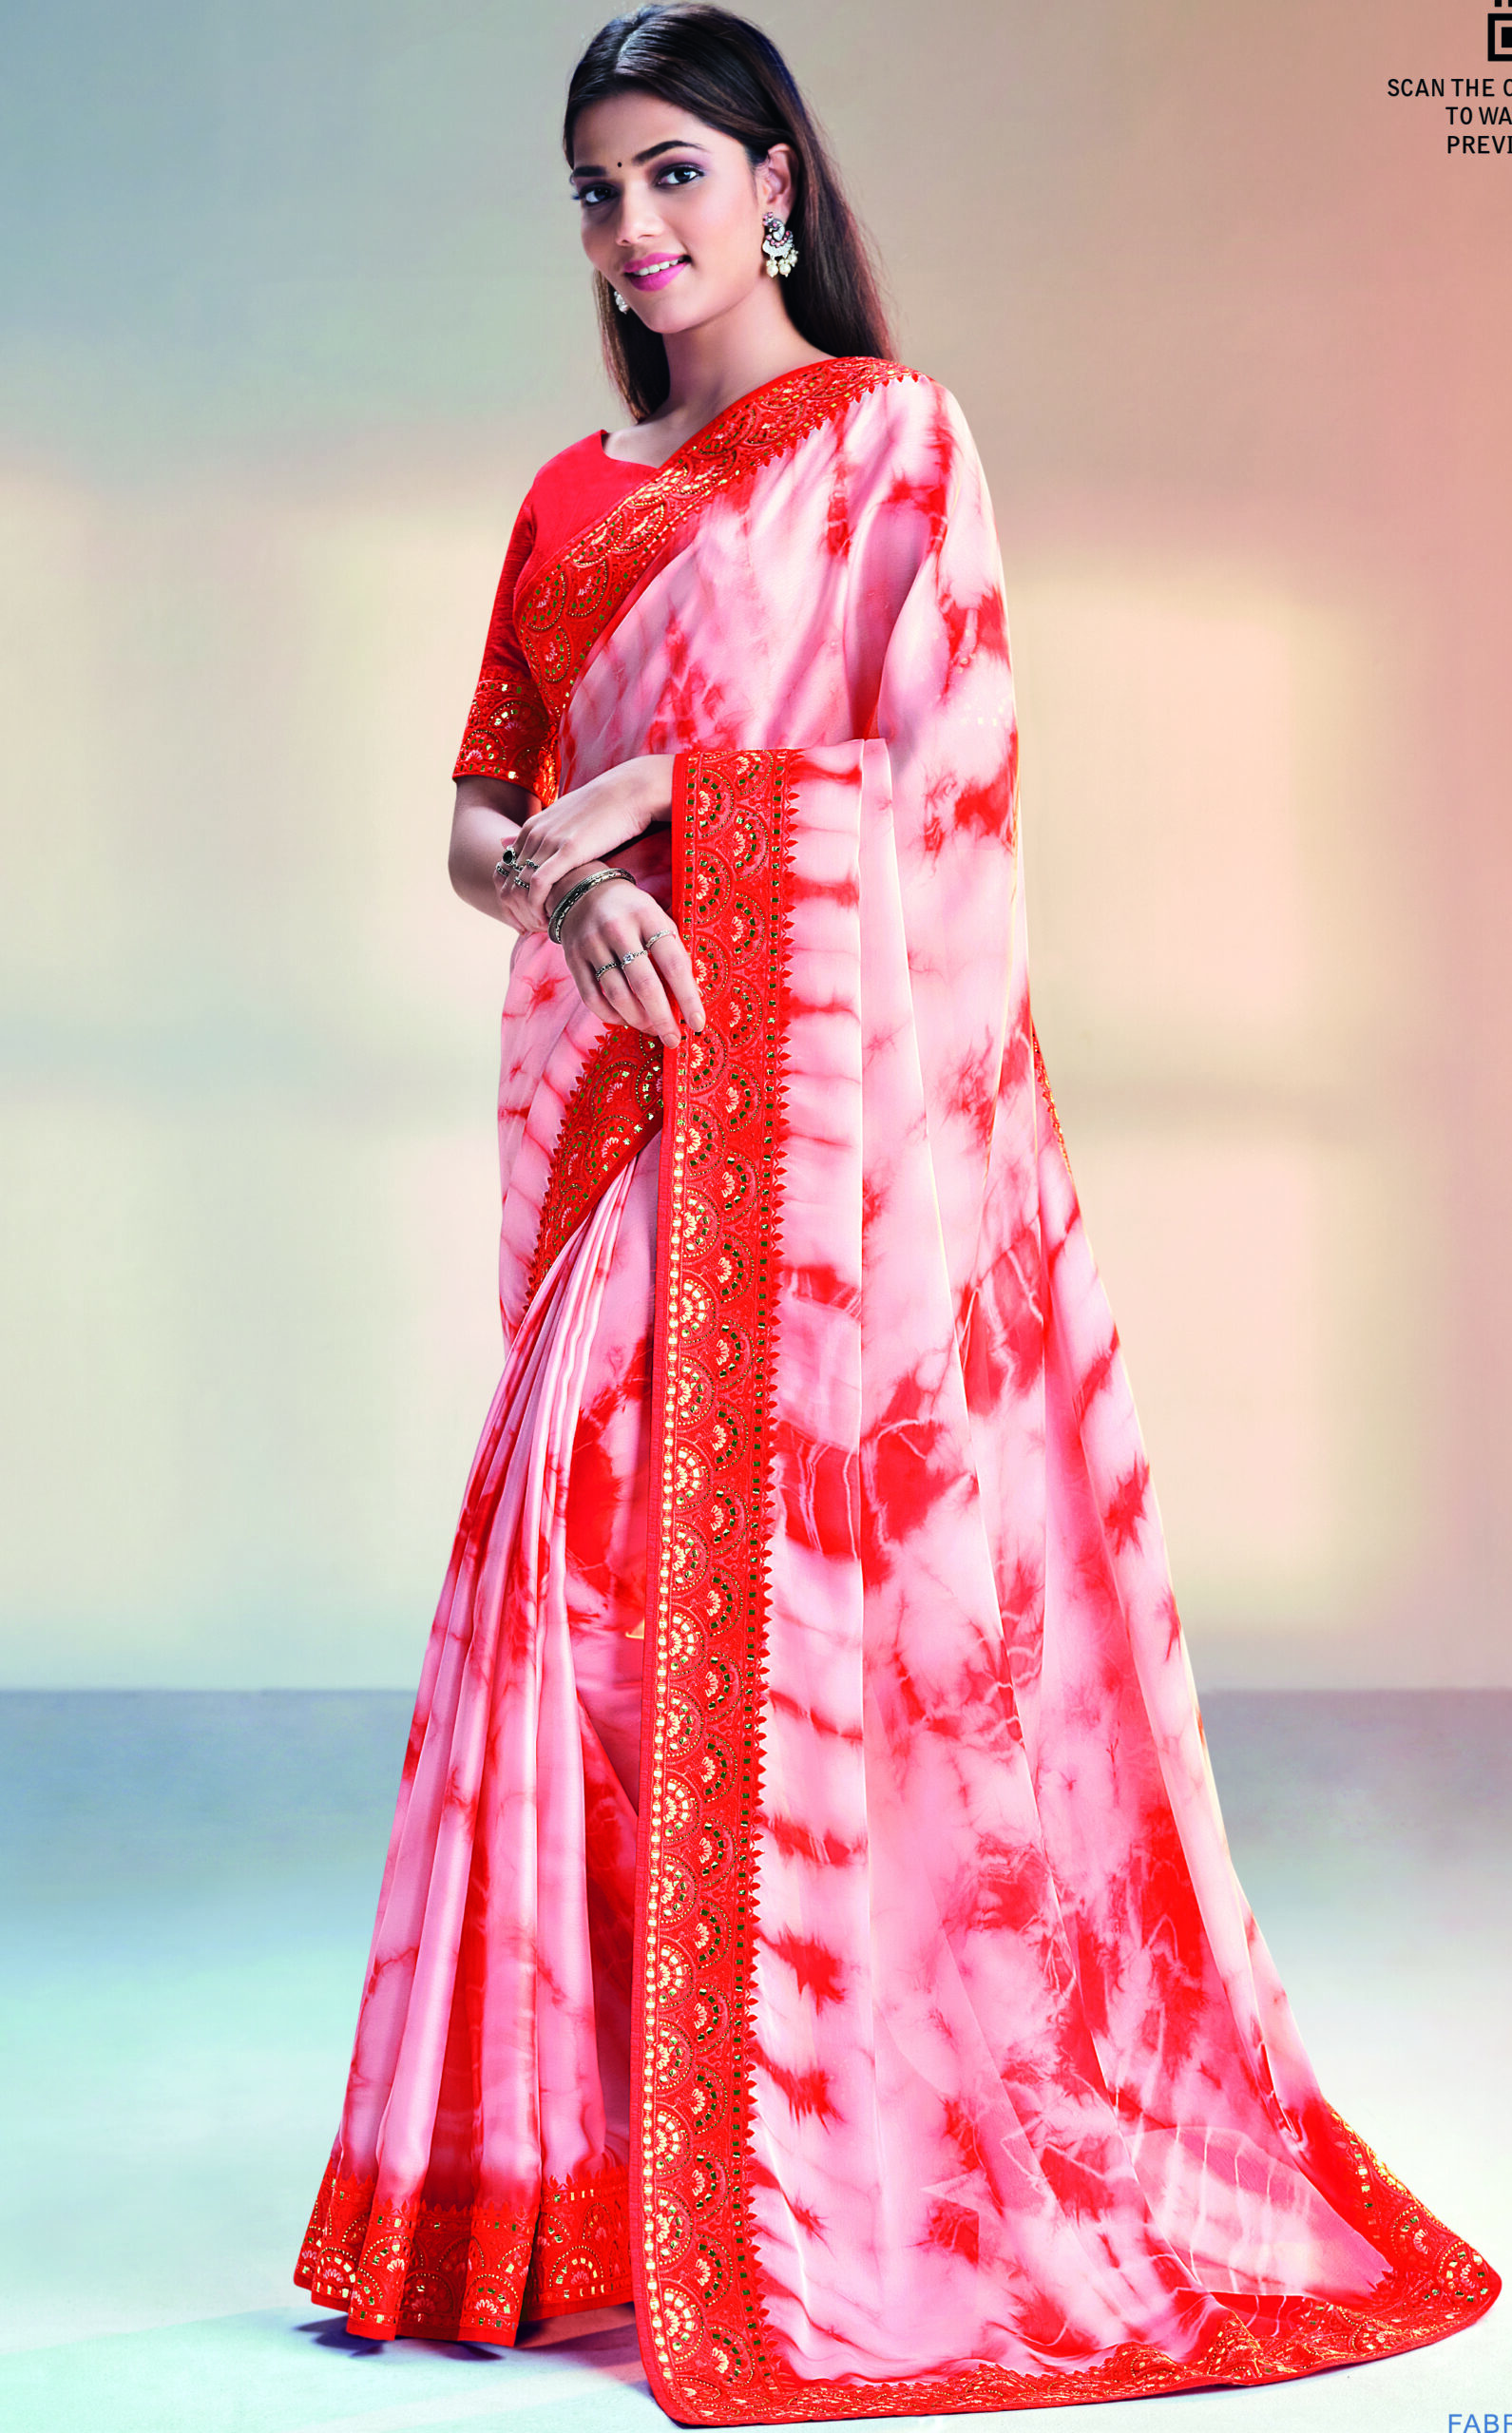 Royal Designer Party Wear Saree for Women in Red